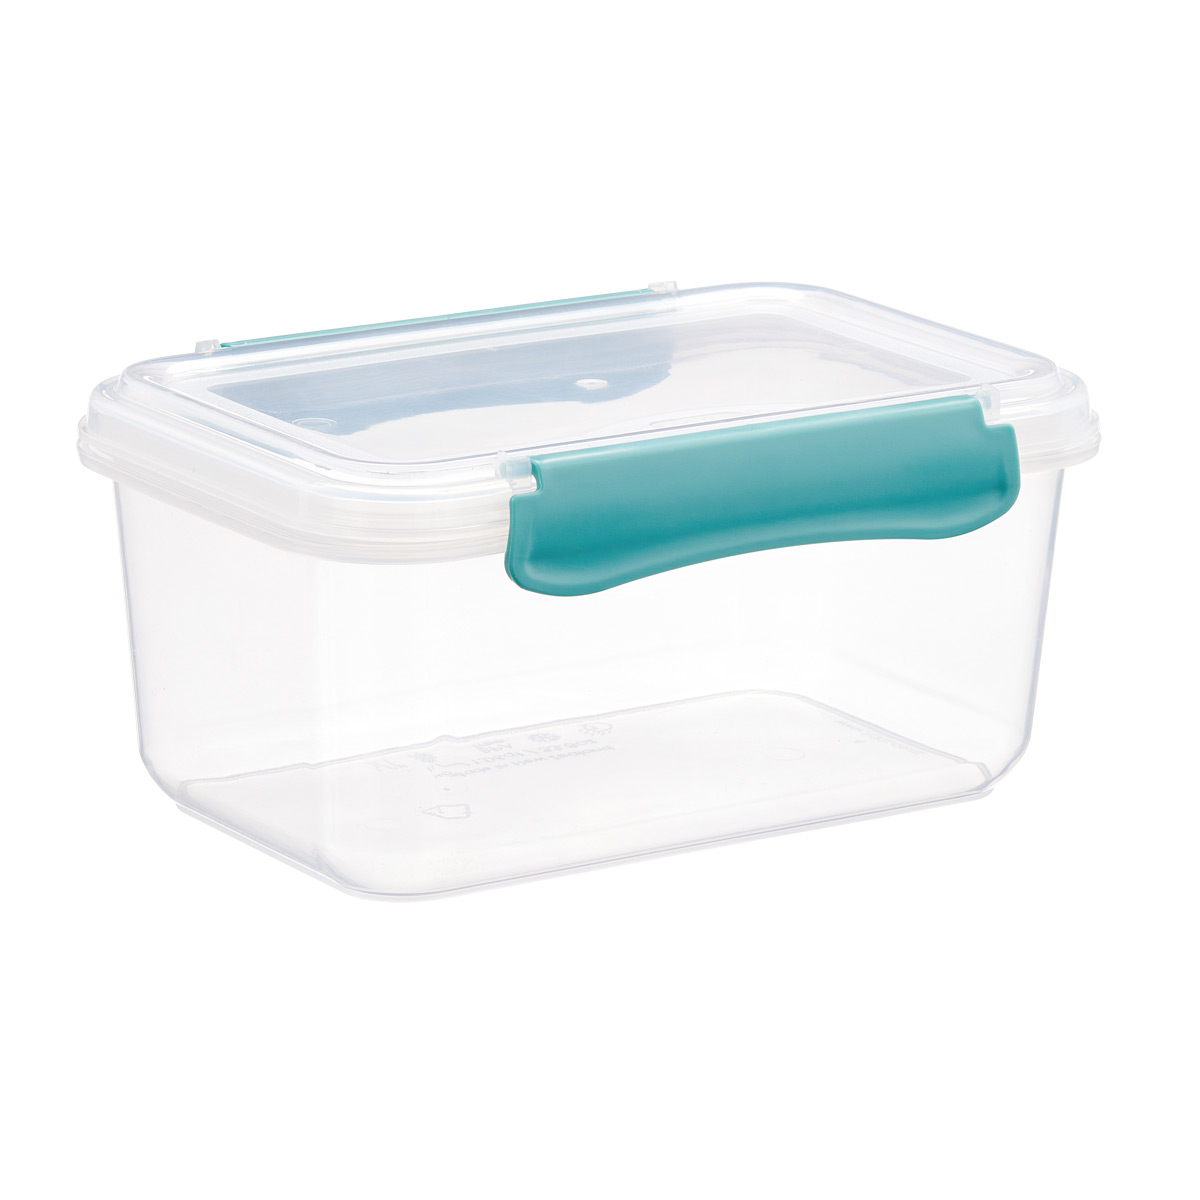 The Container Store 1 qt. Plastic Food Container Mint